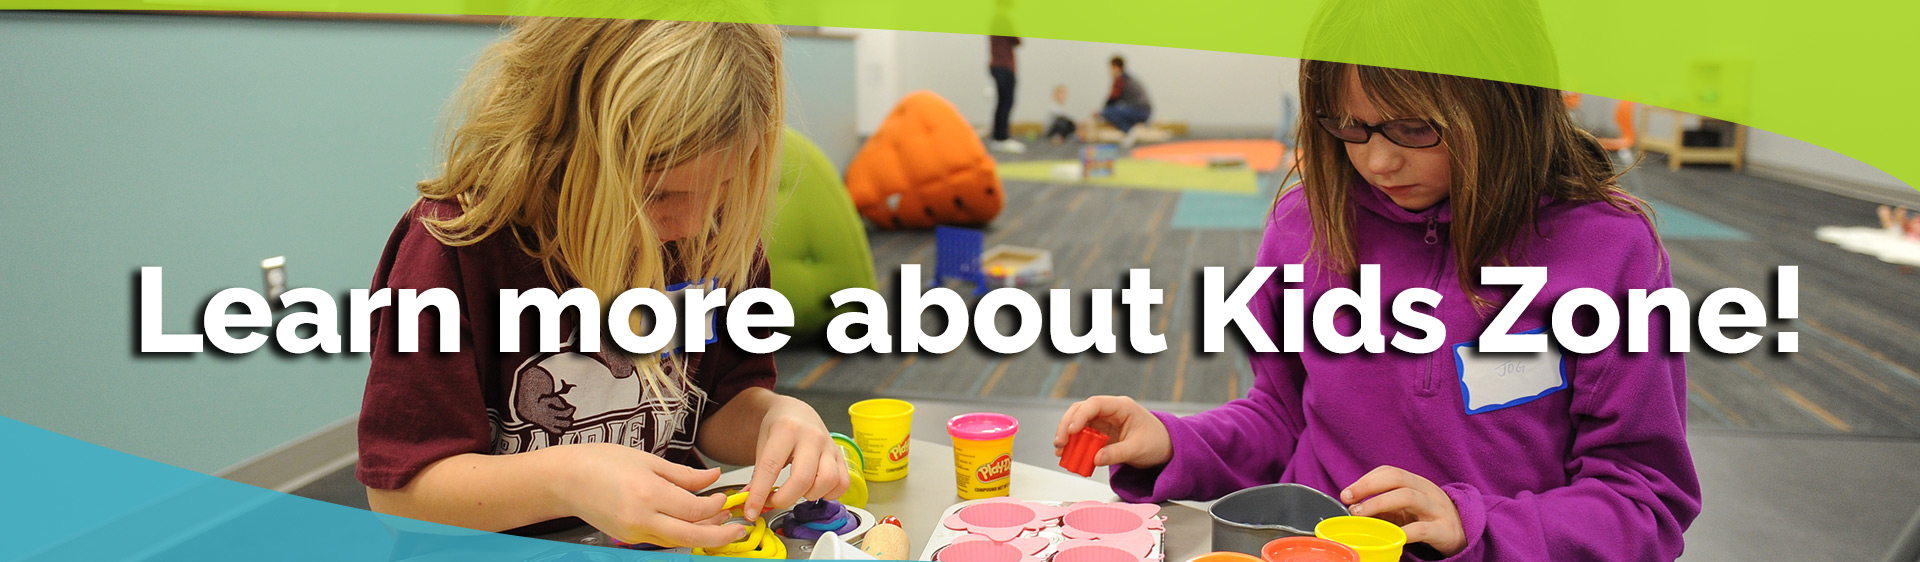 Learn more about Kids Zone